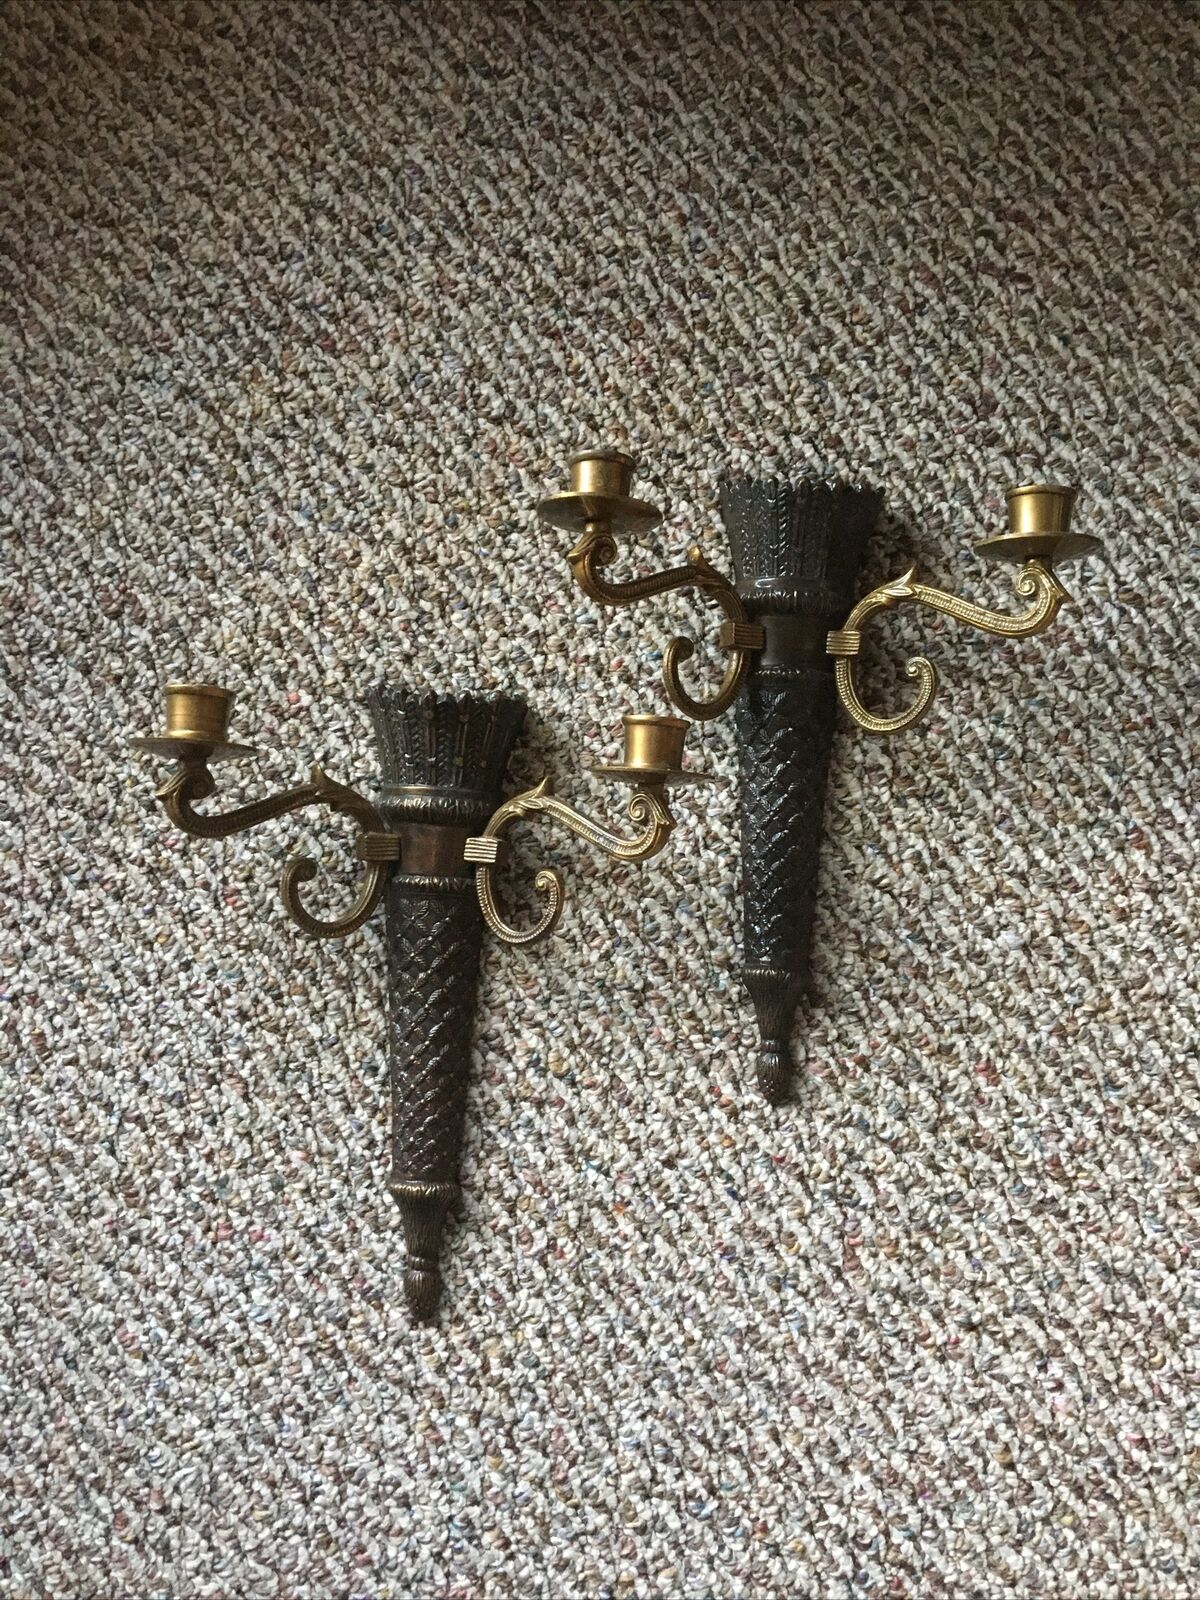 Antique Wall Sconce Candle Holder Candelabrum 2 Lamps